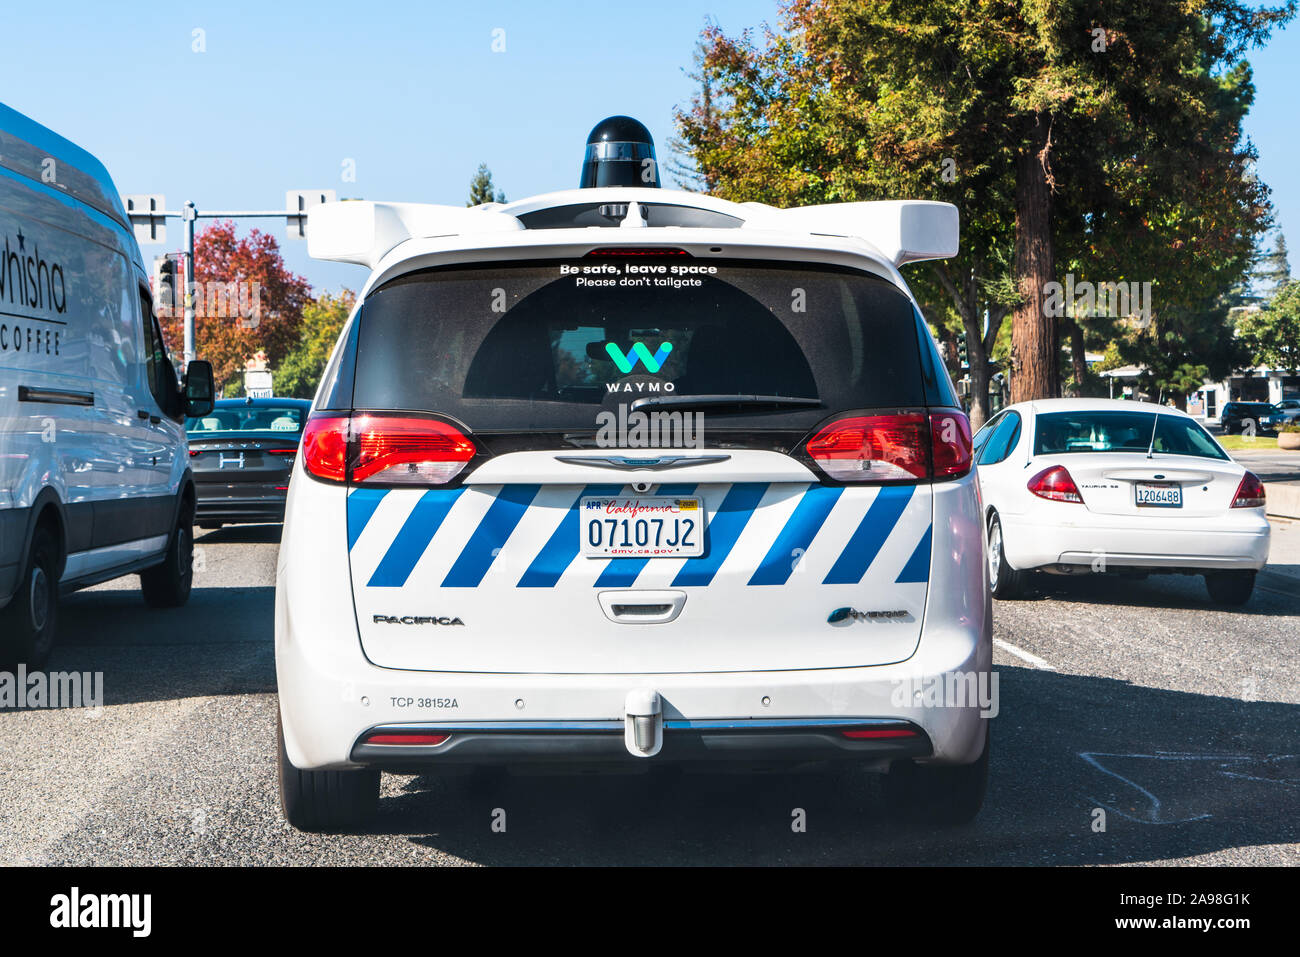 Nov 8, 2019 Mountain View / CA / USA - Waymo self driving car performing tests on a street near Google's offices, Silicon Valley; Waymo, a subsidiary Stock Photo